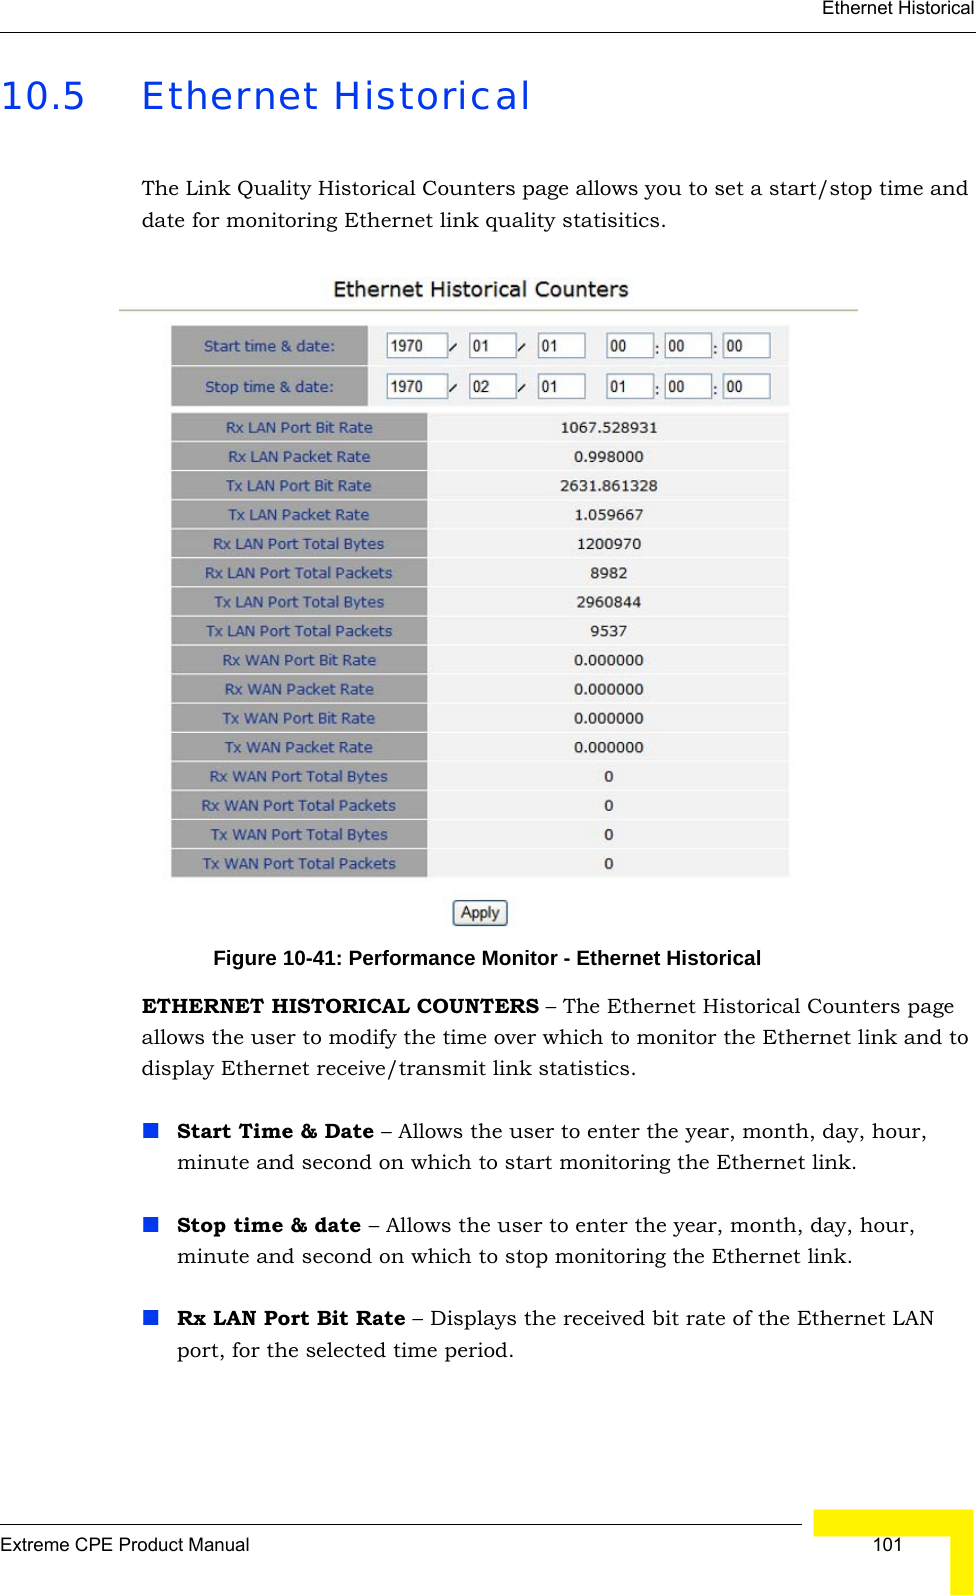 Ethernet HistoricalExtreme CPE Product Manual  10110.5 Ethernet HistoricalThe Link Quality Historical Counters page allows you to set a start/stop time and date for monitoring Ethernet link quality statisitics.Figure 10-41: Performance Monitor - Ethernet HistoricalETHERNET HISTORICAL COUNTERS – The Ethernet Historical Counters page allows the user to modify the time over which to monitor the Ethernet link and to display Ethernet receive/transmit link statistics.Start Time &amp; Date – Allows the user to enter the year, month, day, hour, minute and second on which to start monitoring the Ethernet link.Stop time &amp; date – Allows the user to enter the year, month, day, hour, minute and second on which to stop monitoring the Ethernet link.Rx LAN Port Bit Rate – Displays the received bit rate of the Ethernet LAN port, for the selected time period.